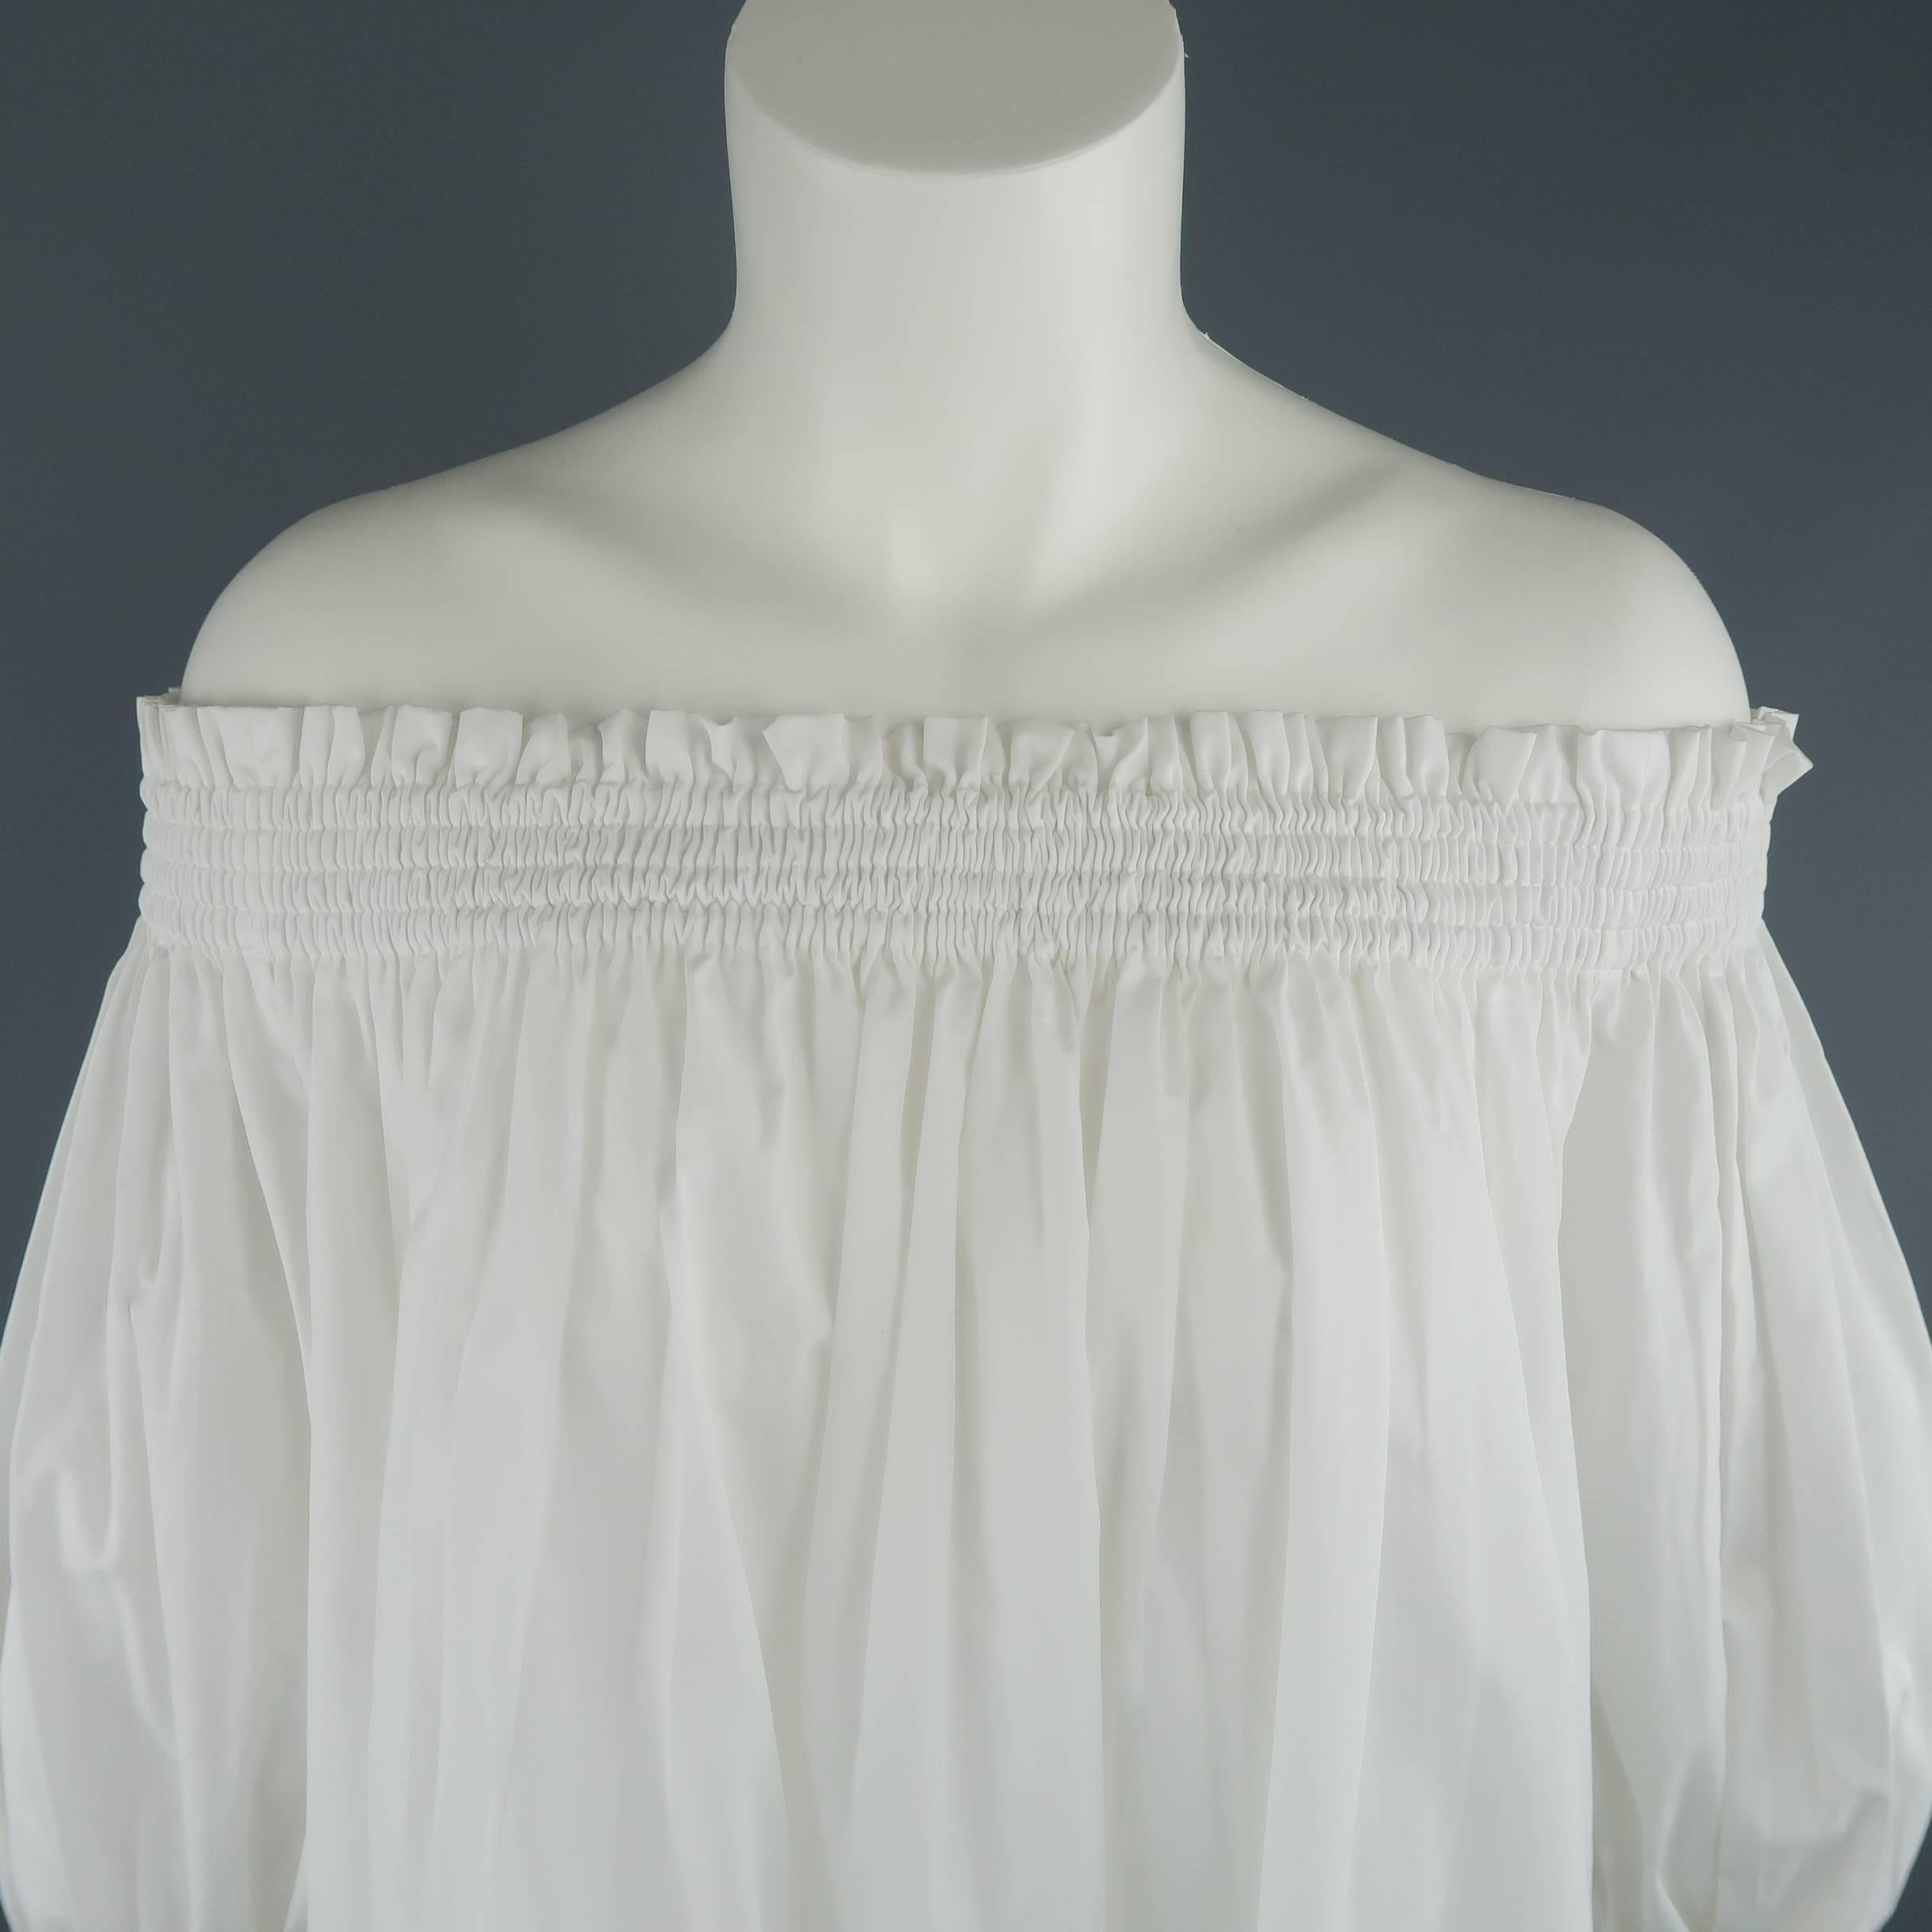 This gorgeous ALEXANDER MCQUEEN peasant blouse comes in white cotton and features a gathered stretch off the shoulder neckline, pleated A line body, and balloon sleeves with lace bell ruffle cuffs.  Made in Italy.
 
Excellent Pre-Owned